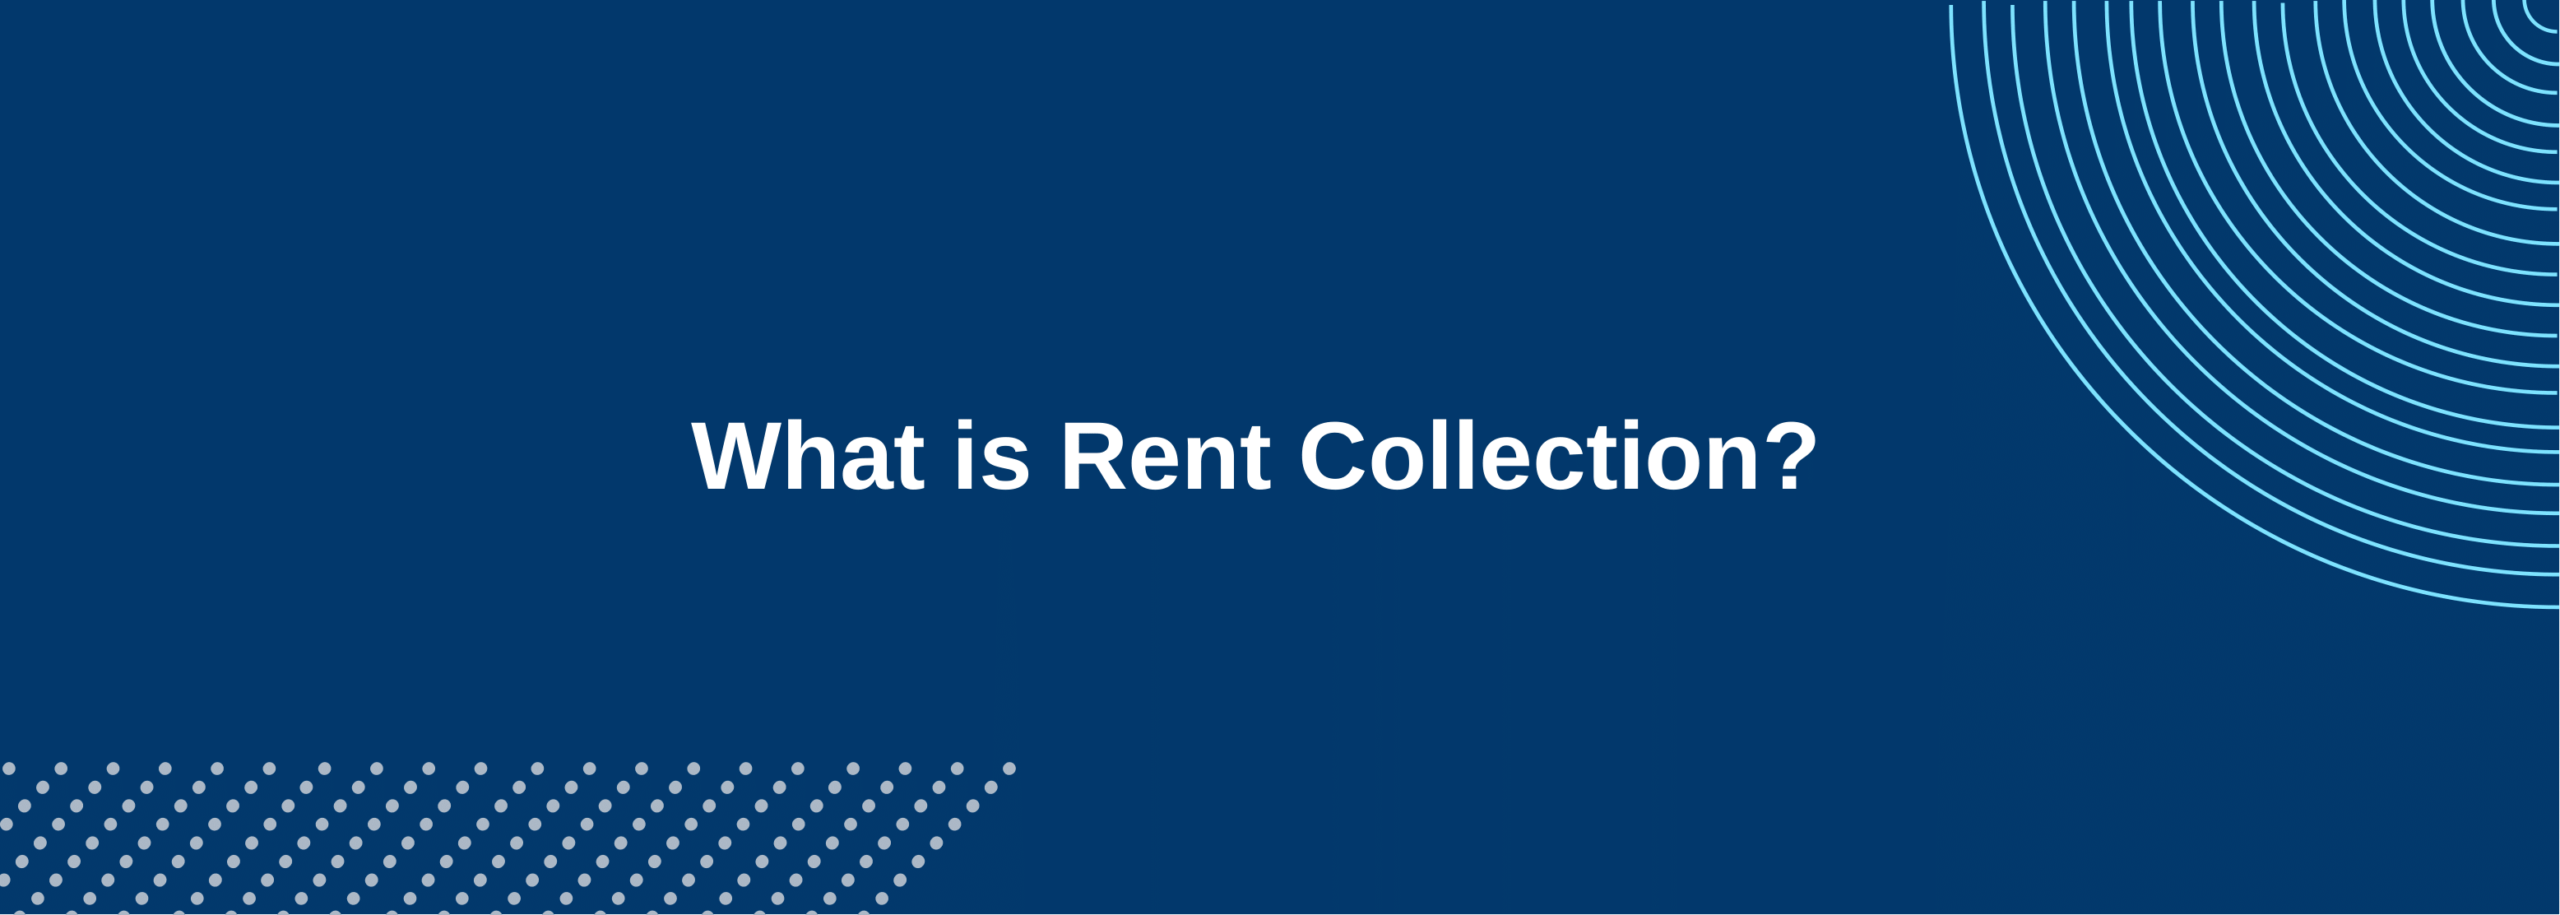 Rent collection is the act of a landlord or property manager gathering the monthly rent payment from their tenant on a set date as outlined in their lease agreement.